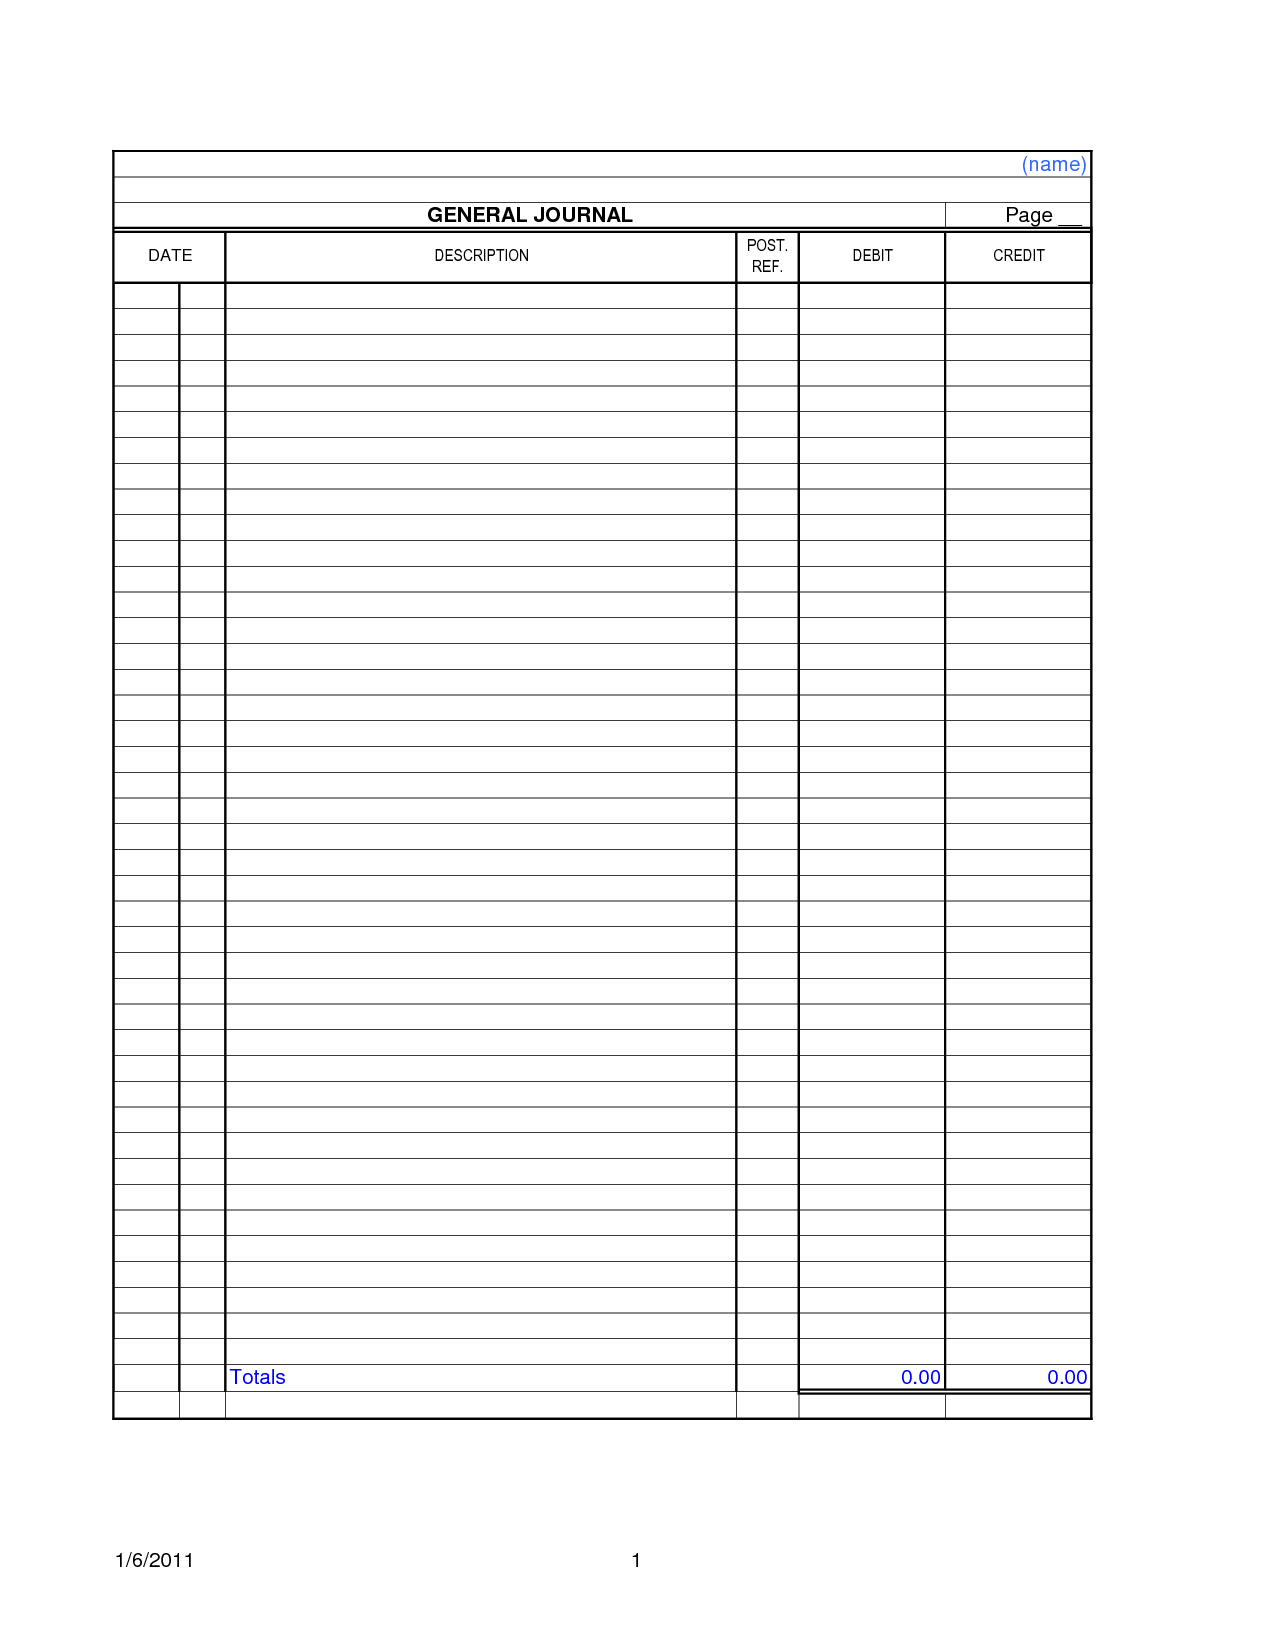 PDF accounting ledger template Accounting PDF  PDFprof.com Pertaining To Blank Ledger Template